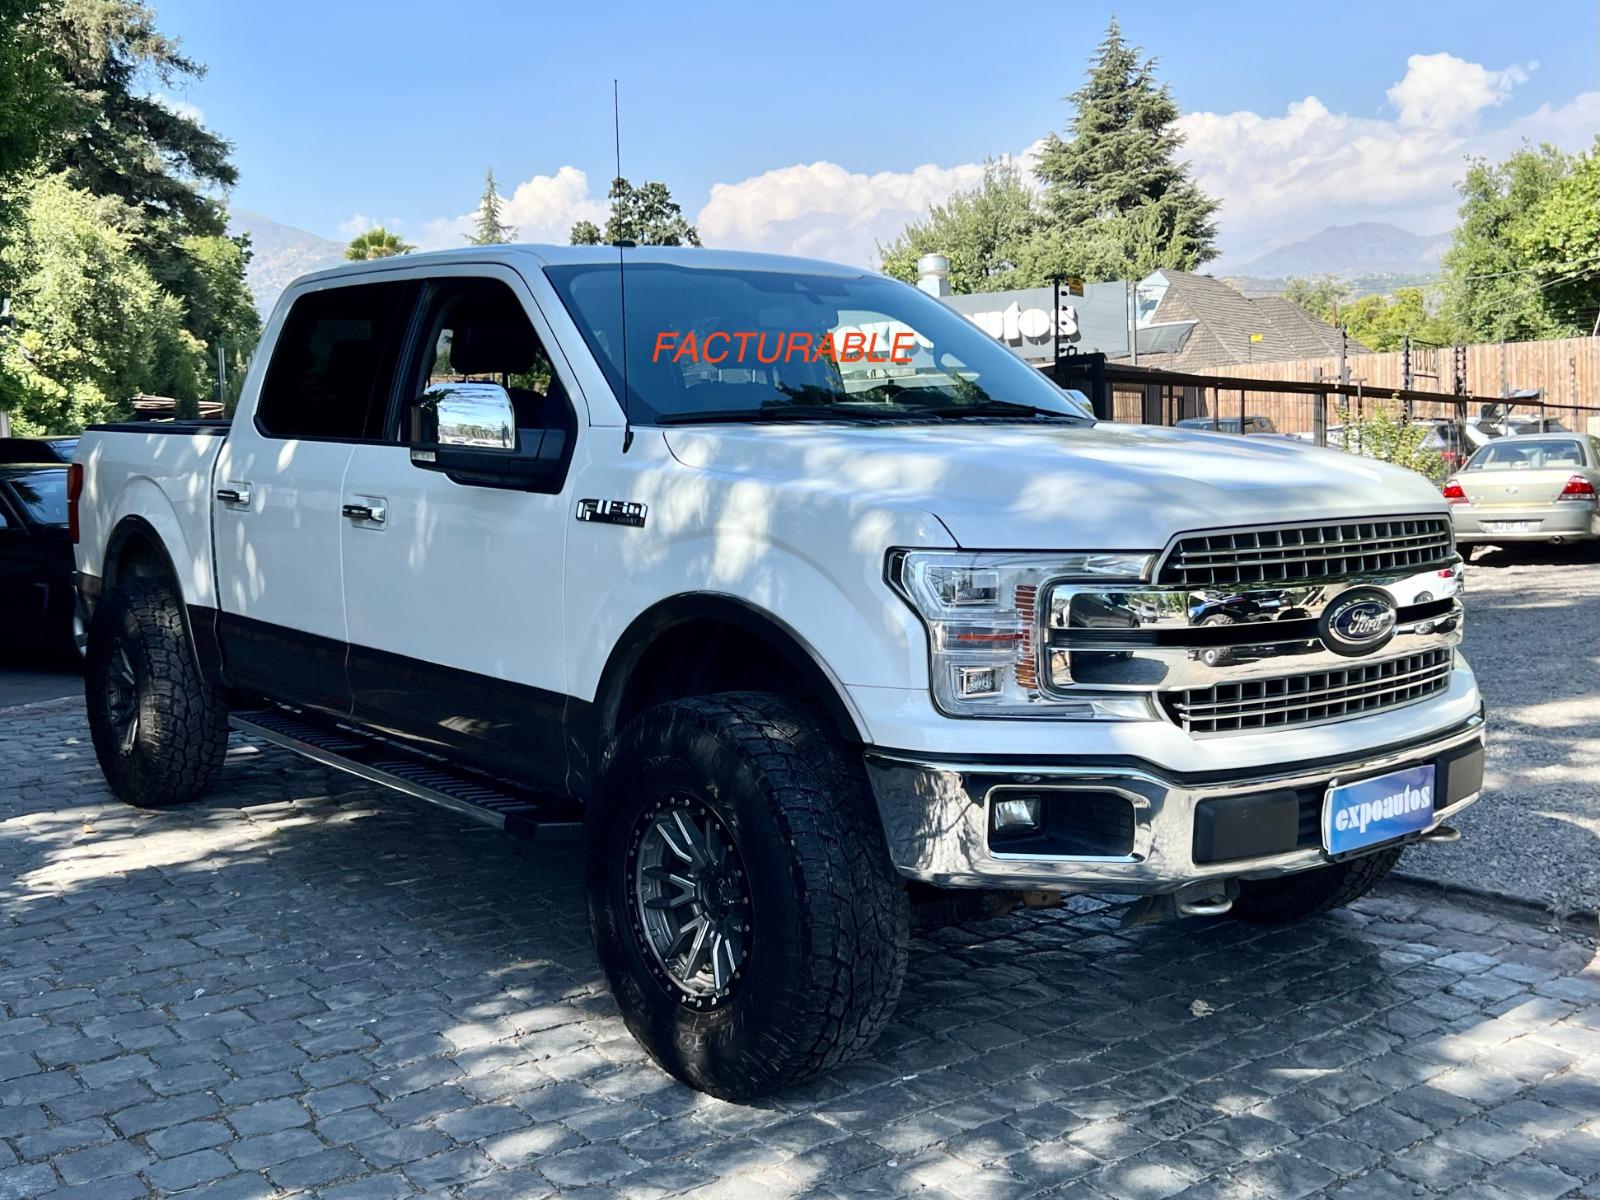 FORD F-150 LARIAT LUXURY 5.0 2021 FACTURABLE - FULL MOTOR